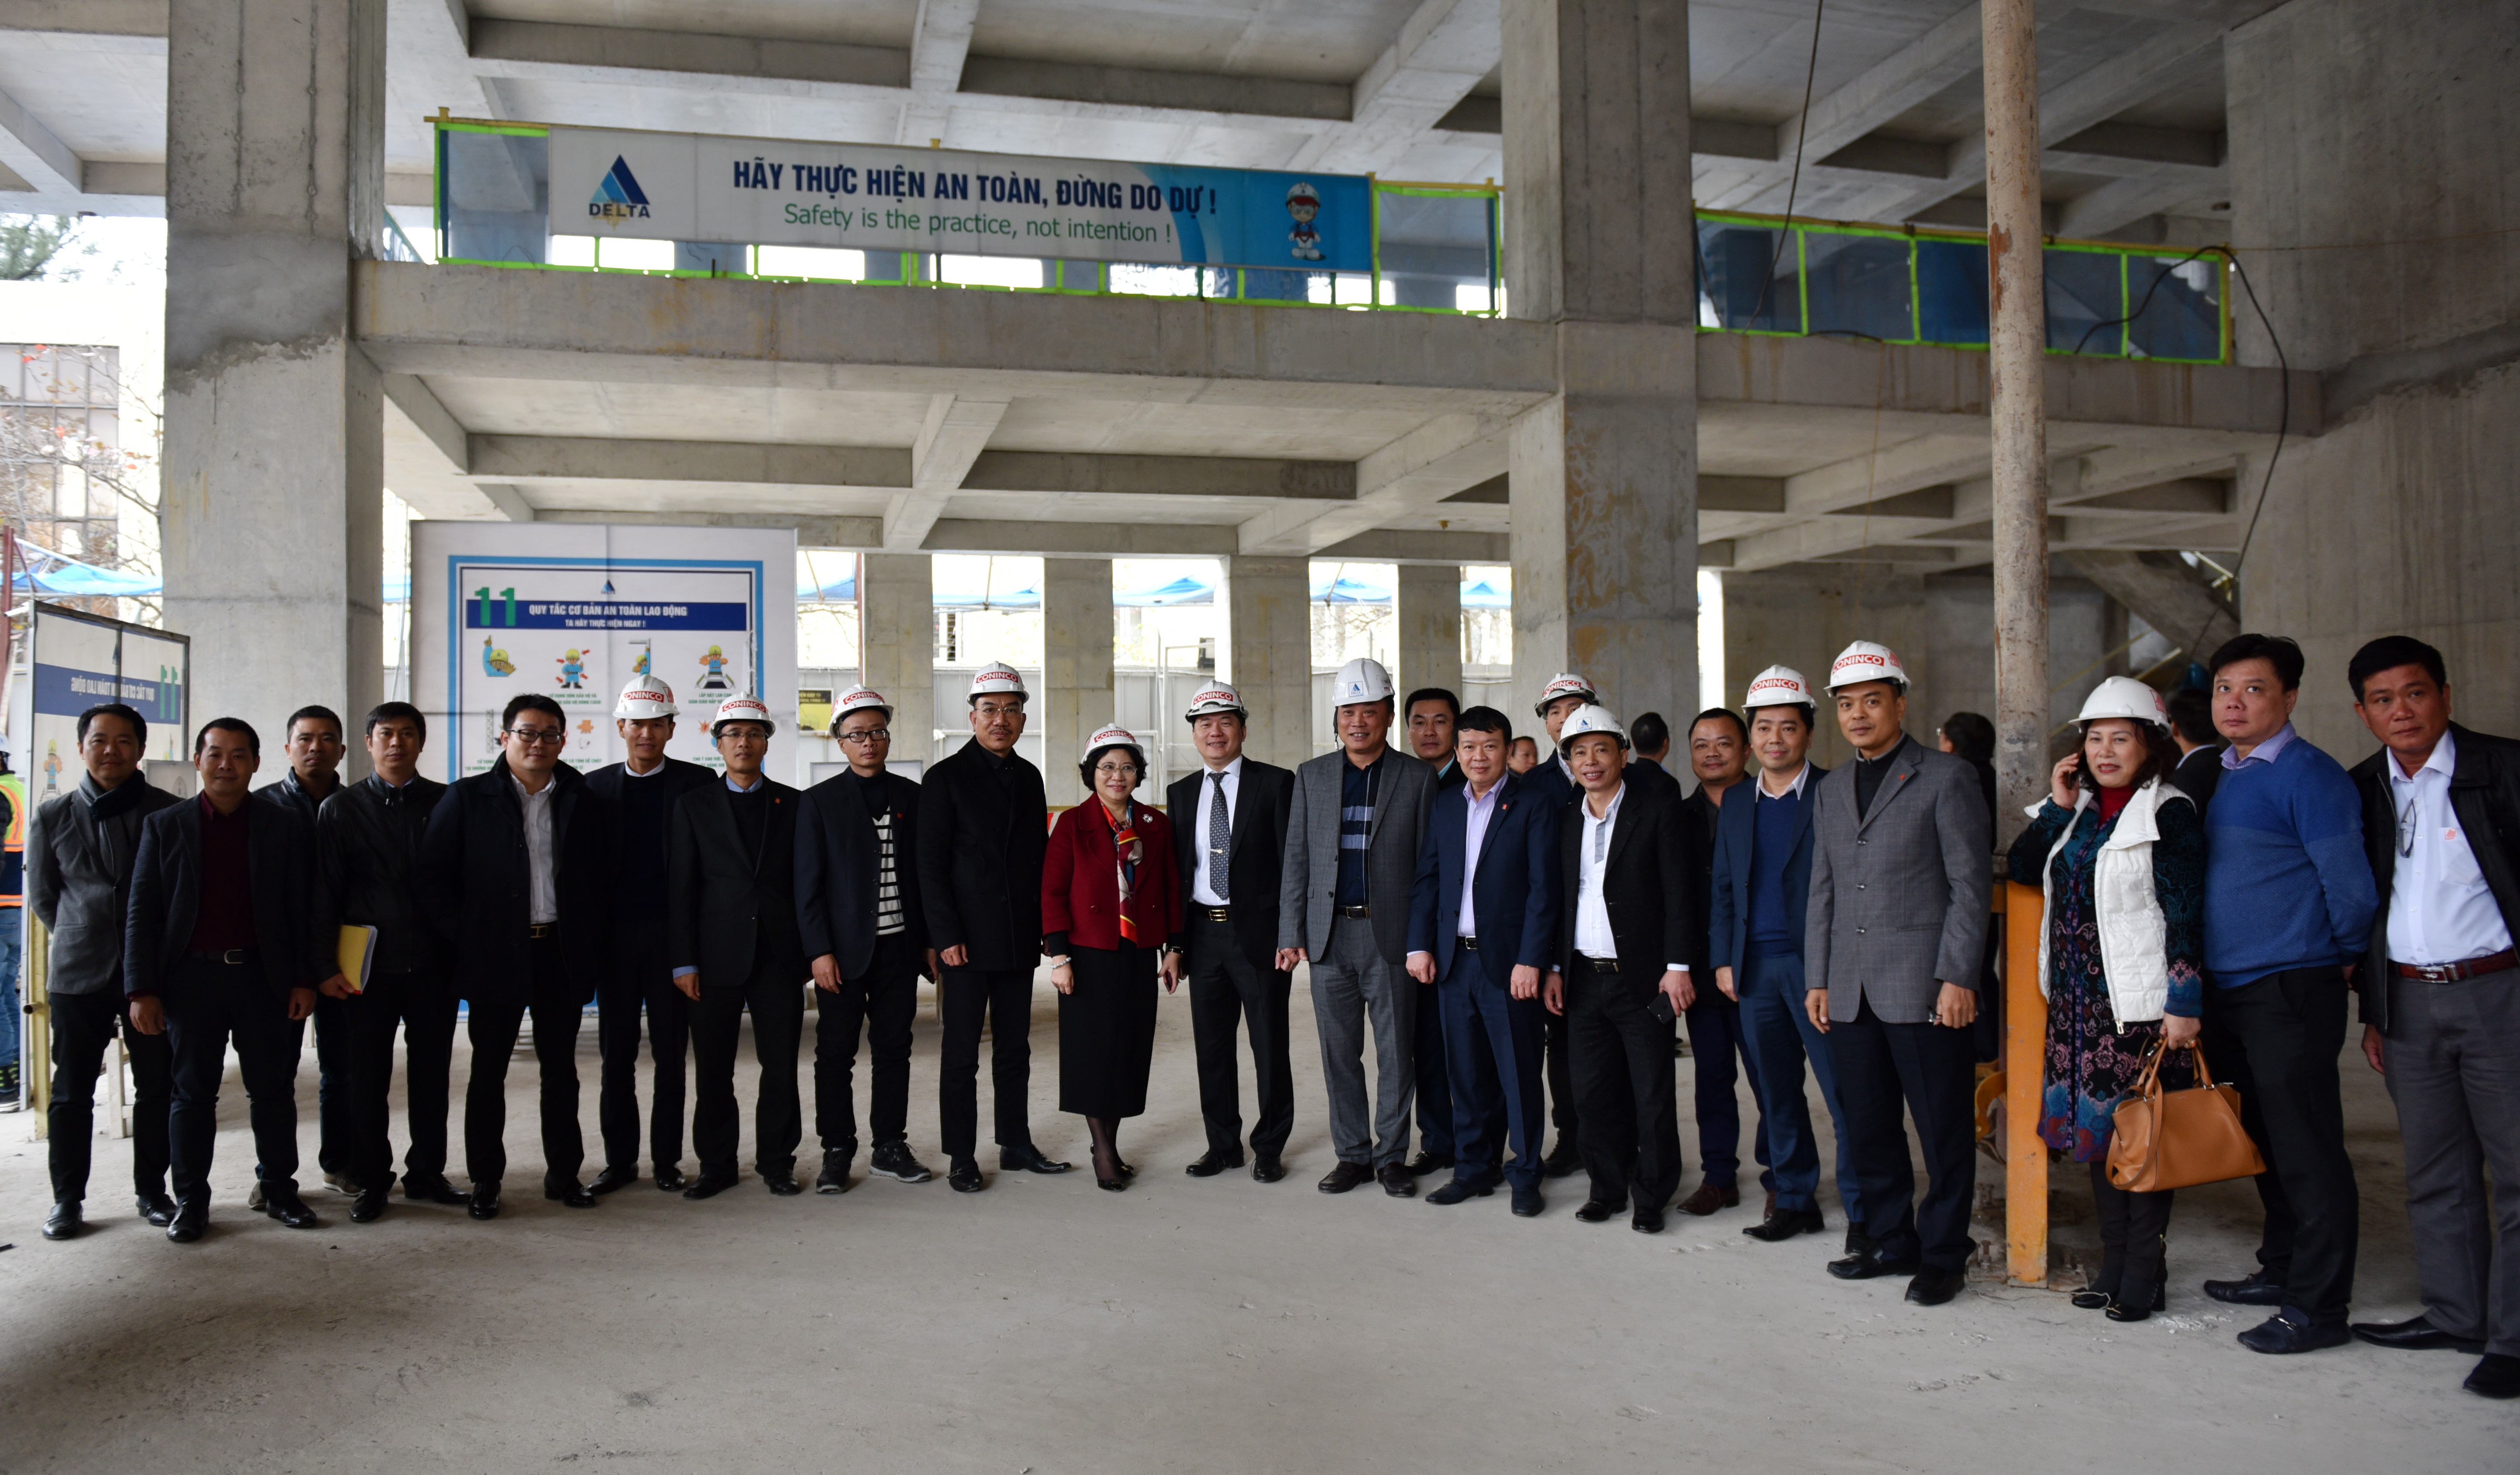 Deputy Minister Construction visited CONINCO TOWER project site